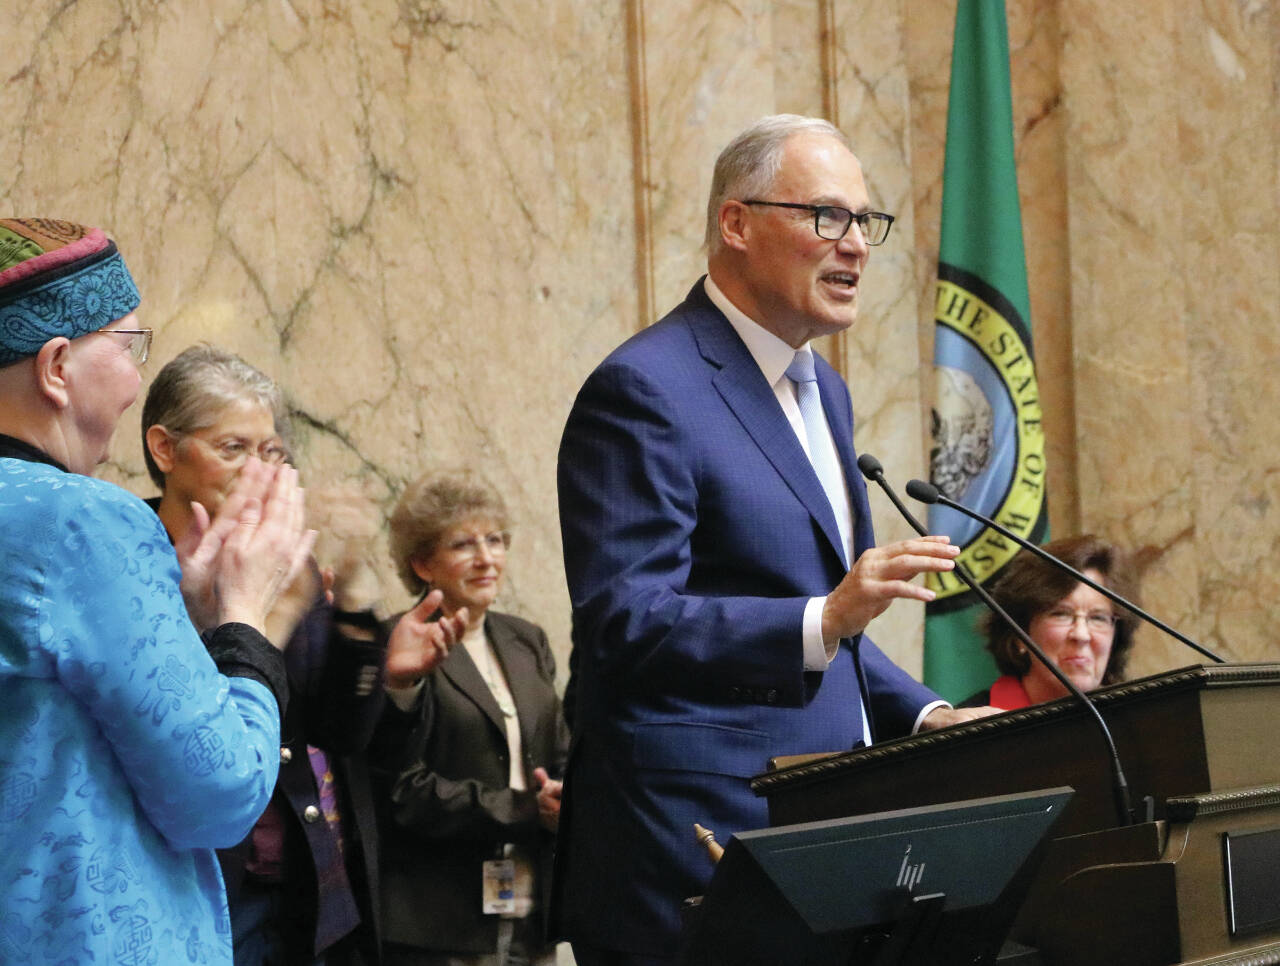 Photo by Aspen Anderson/Washington State Journal / Entering his final year in office, Gov. Jay Inslee calls for action on several fronts in his annual State of the State address to a joint session of the state Legislature.